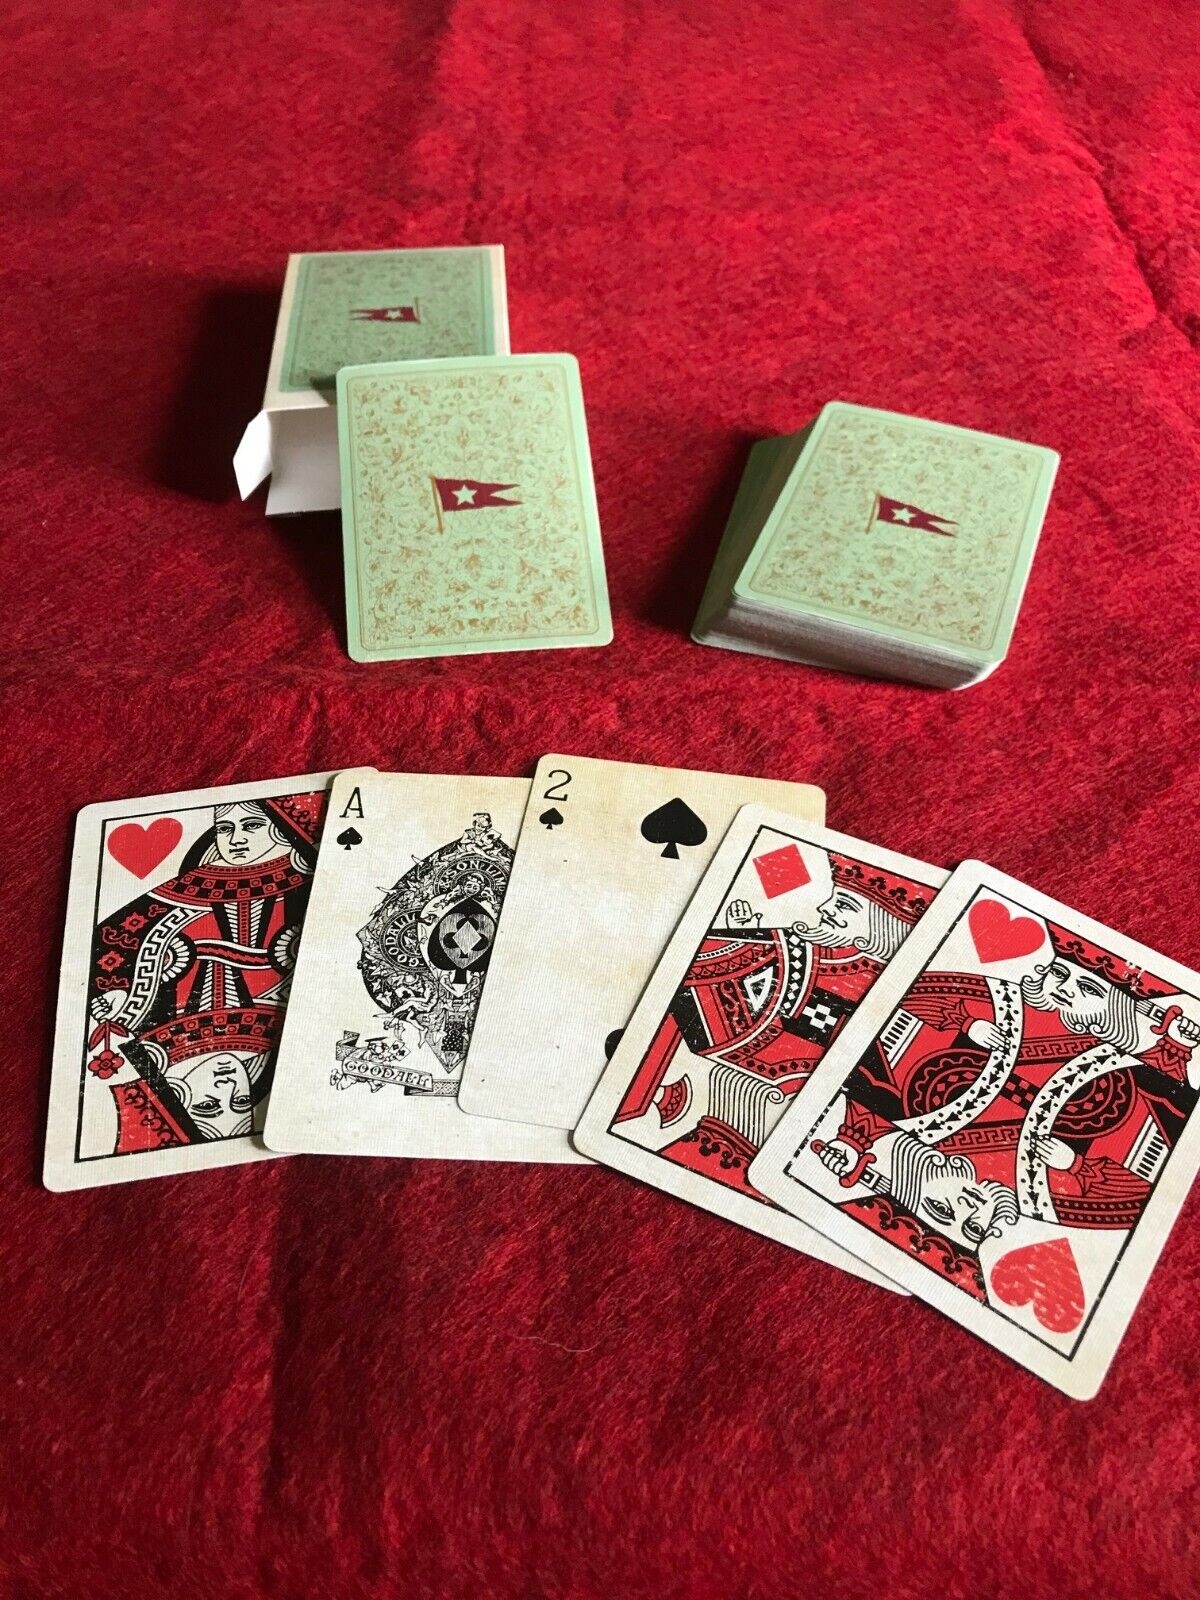 RMS TITANIC WSL - AUTHENTIC COMPLETE DECK OF CARDS 1912, STUNNING REPLICA